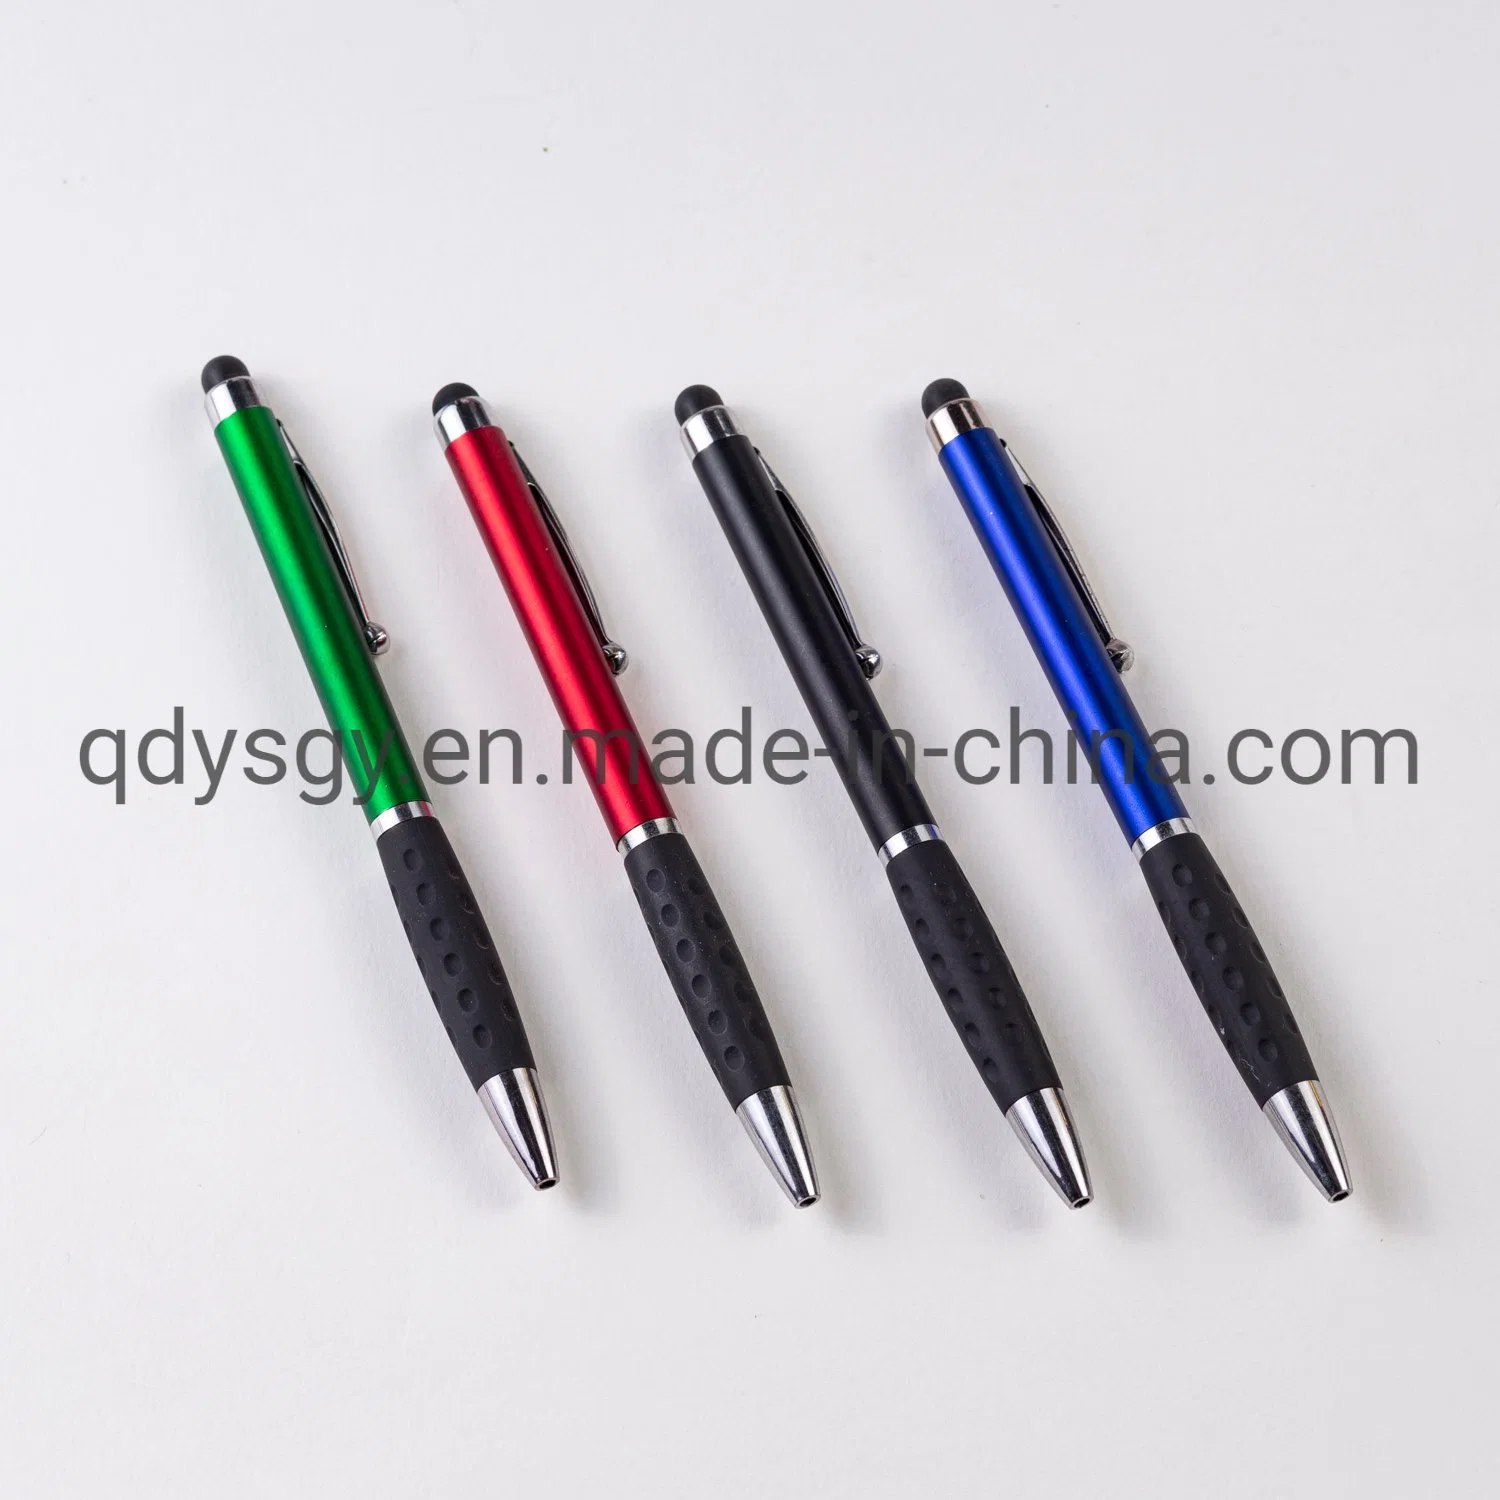 Promotional Stylus Ball Pen for Office Supply Stationery